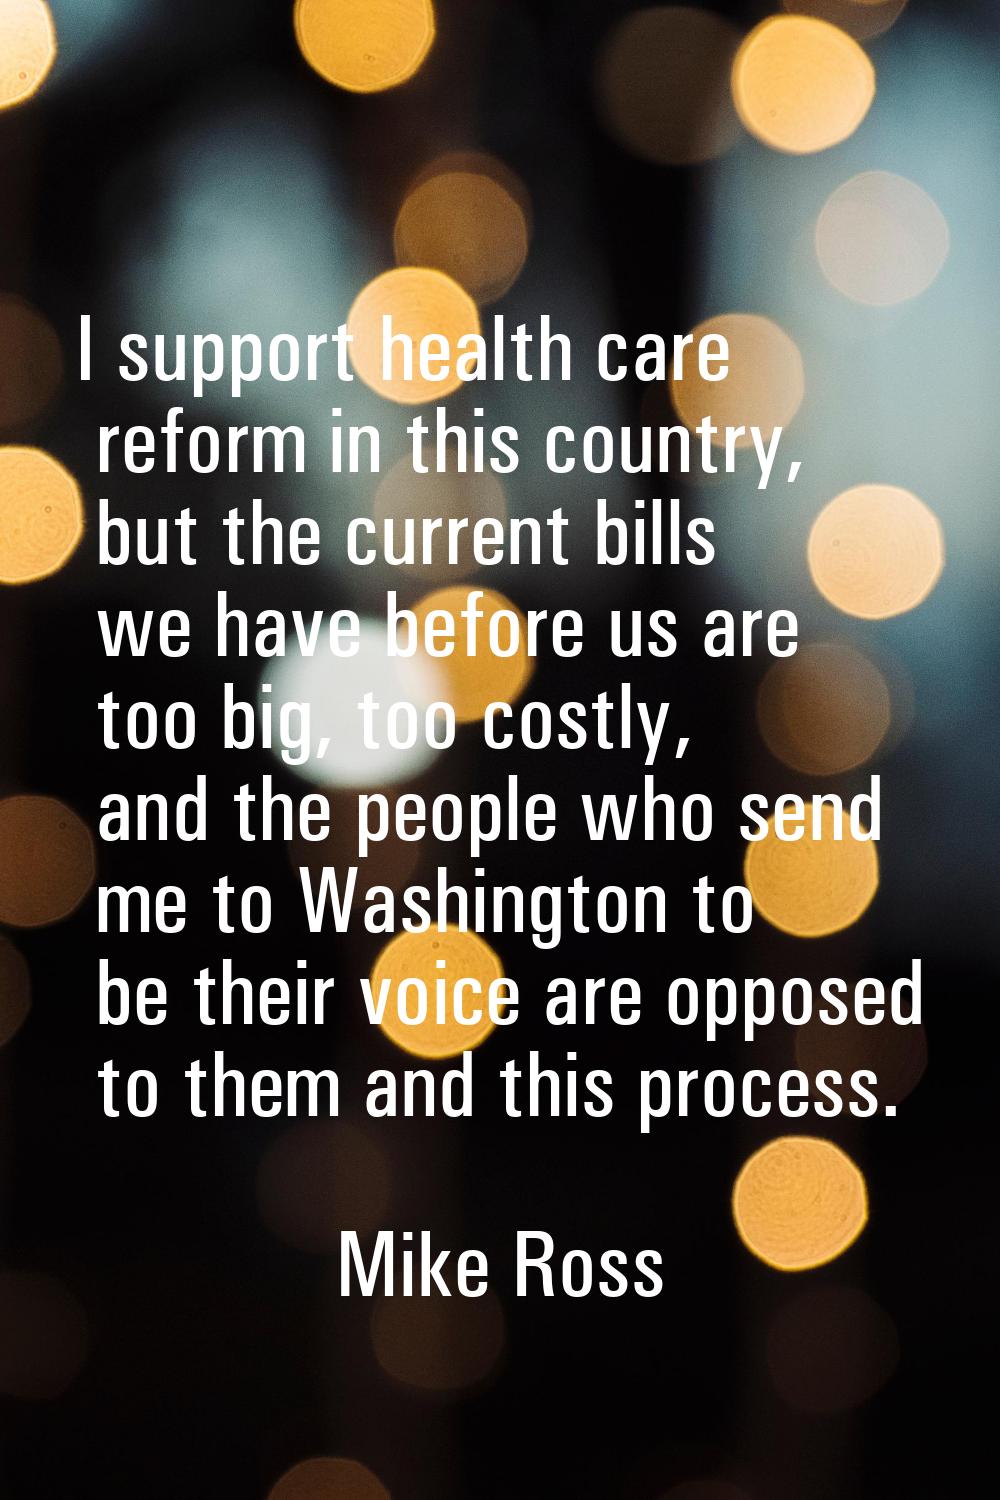 I support health care reform in this country, but the current bills we have before us are too big, 